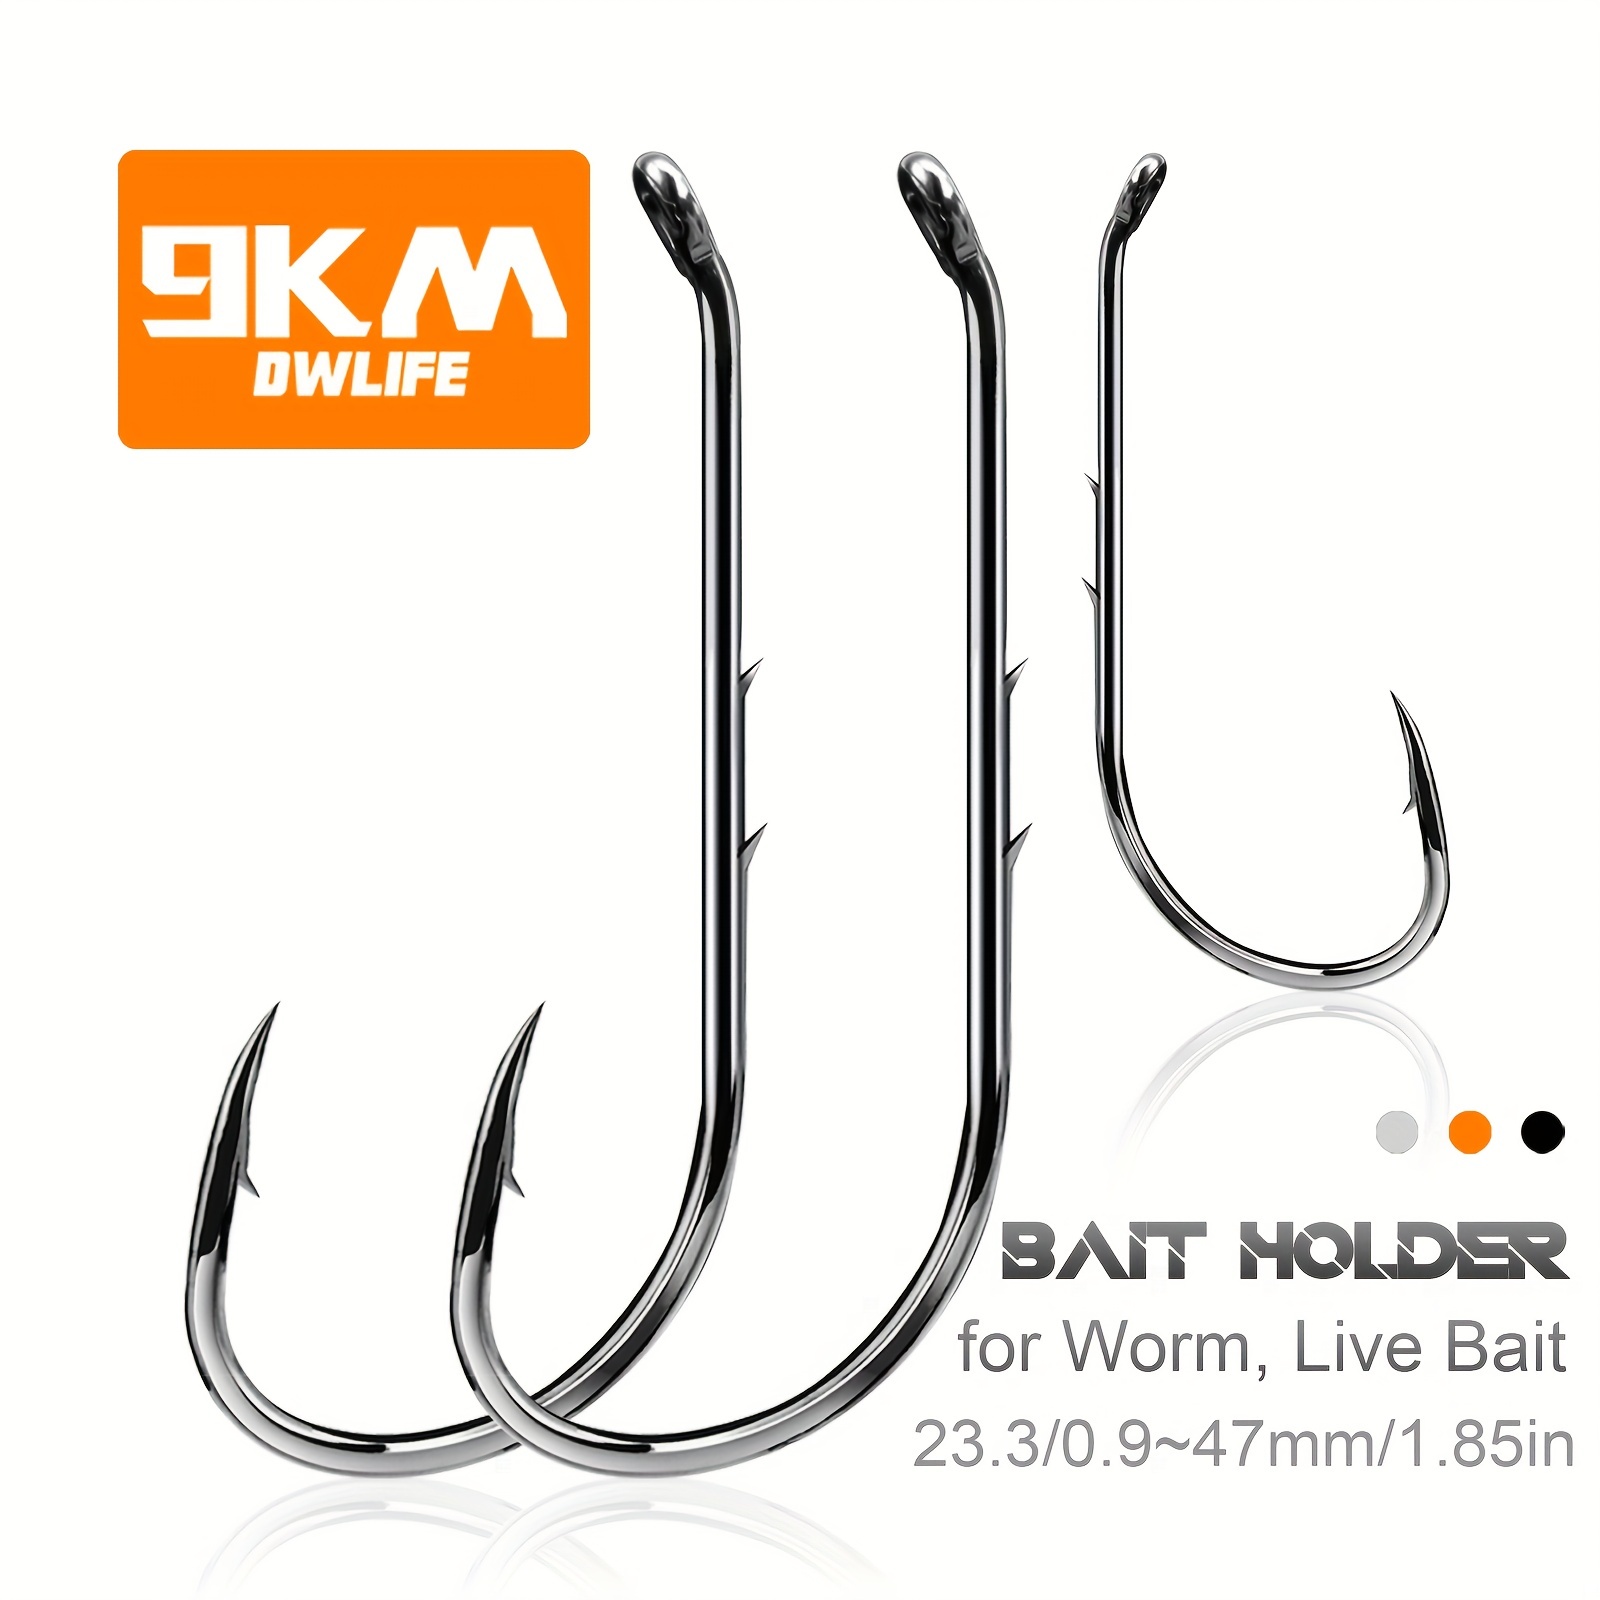 50pcs High Strength Offset Bait Holder Hooks for Freshwater and Saltwater  Fishing - Long Shank Bait Hook with High Carbon Steel and Corrosion Resistan